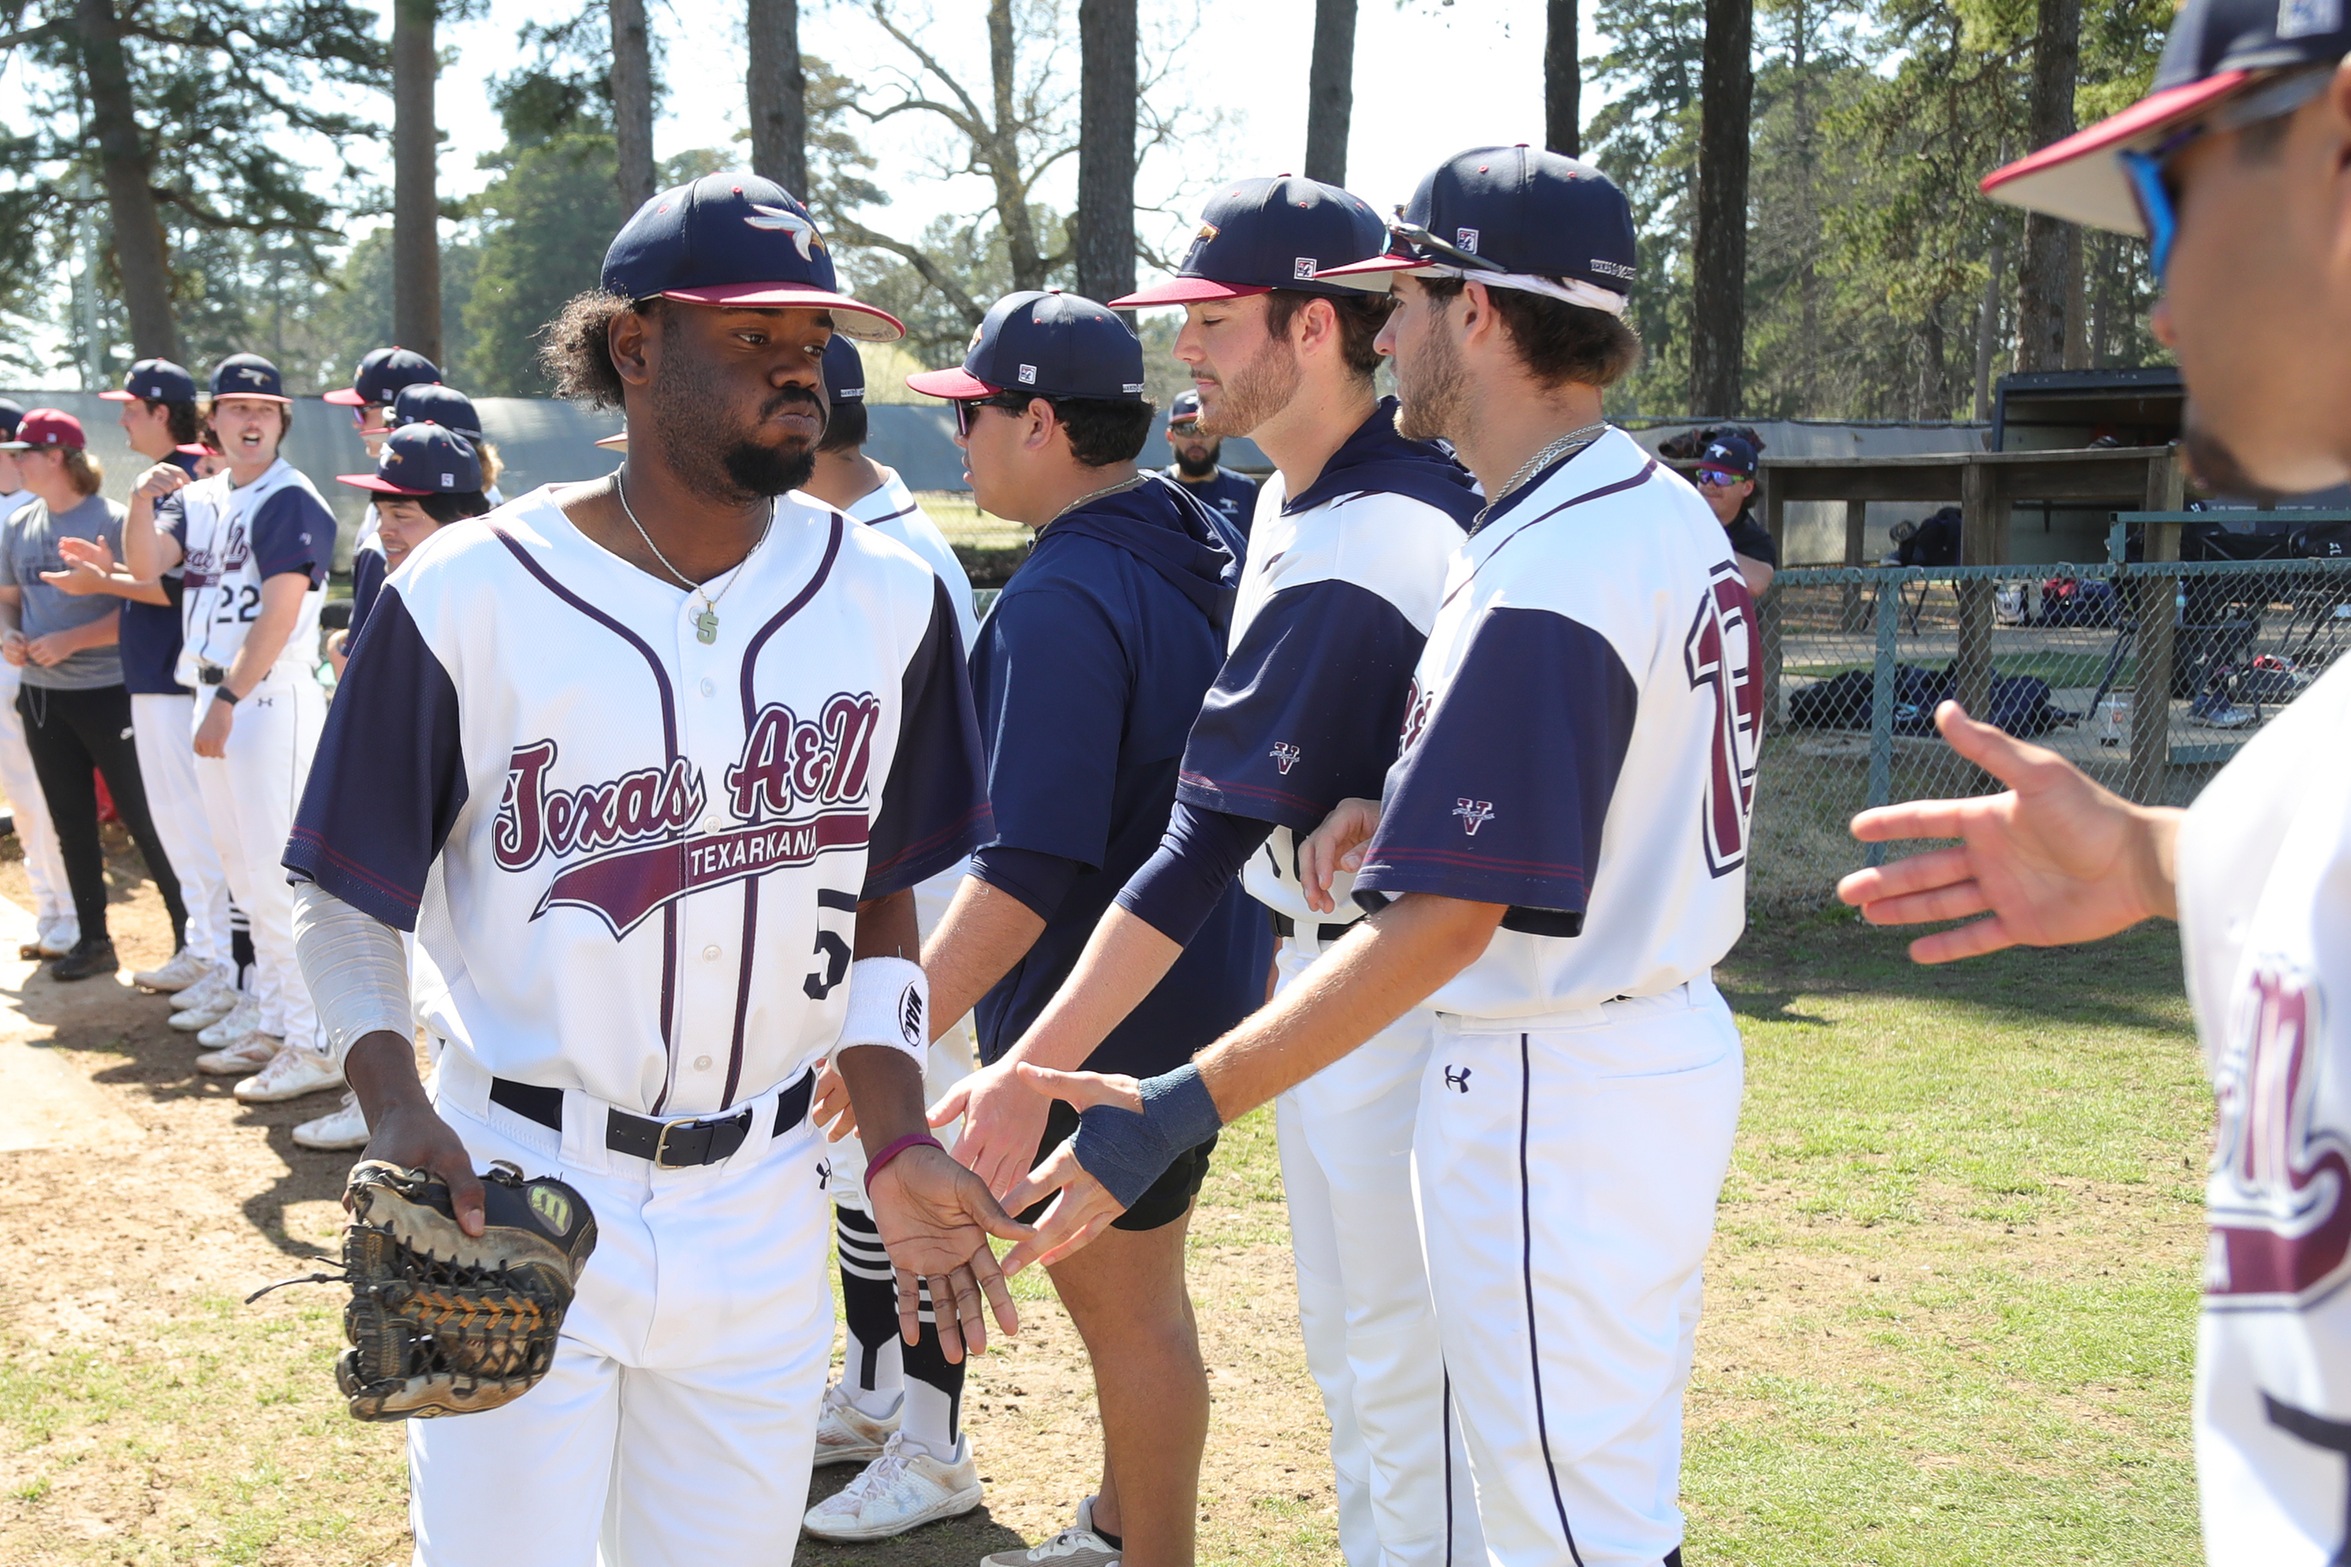 Eagles enter RRAC Championships on Wednesday as second seed